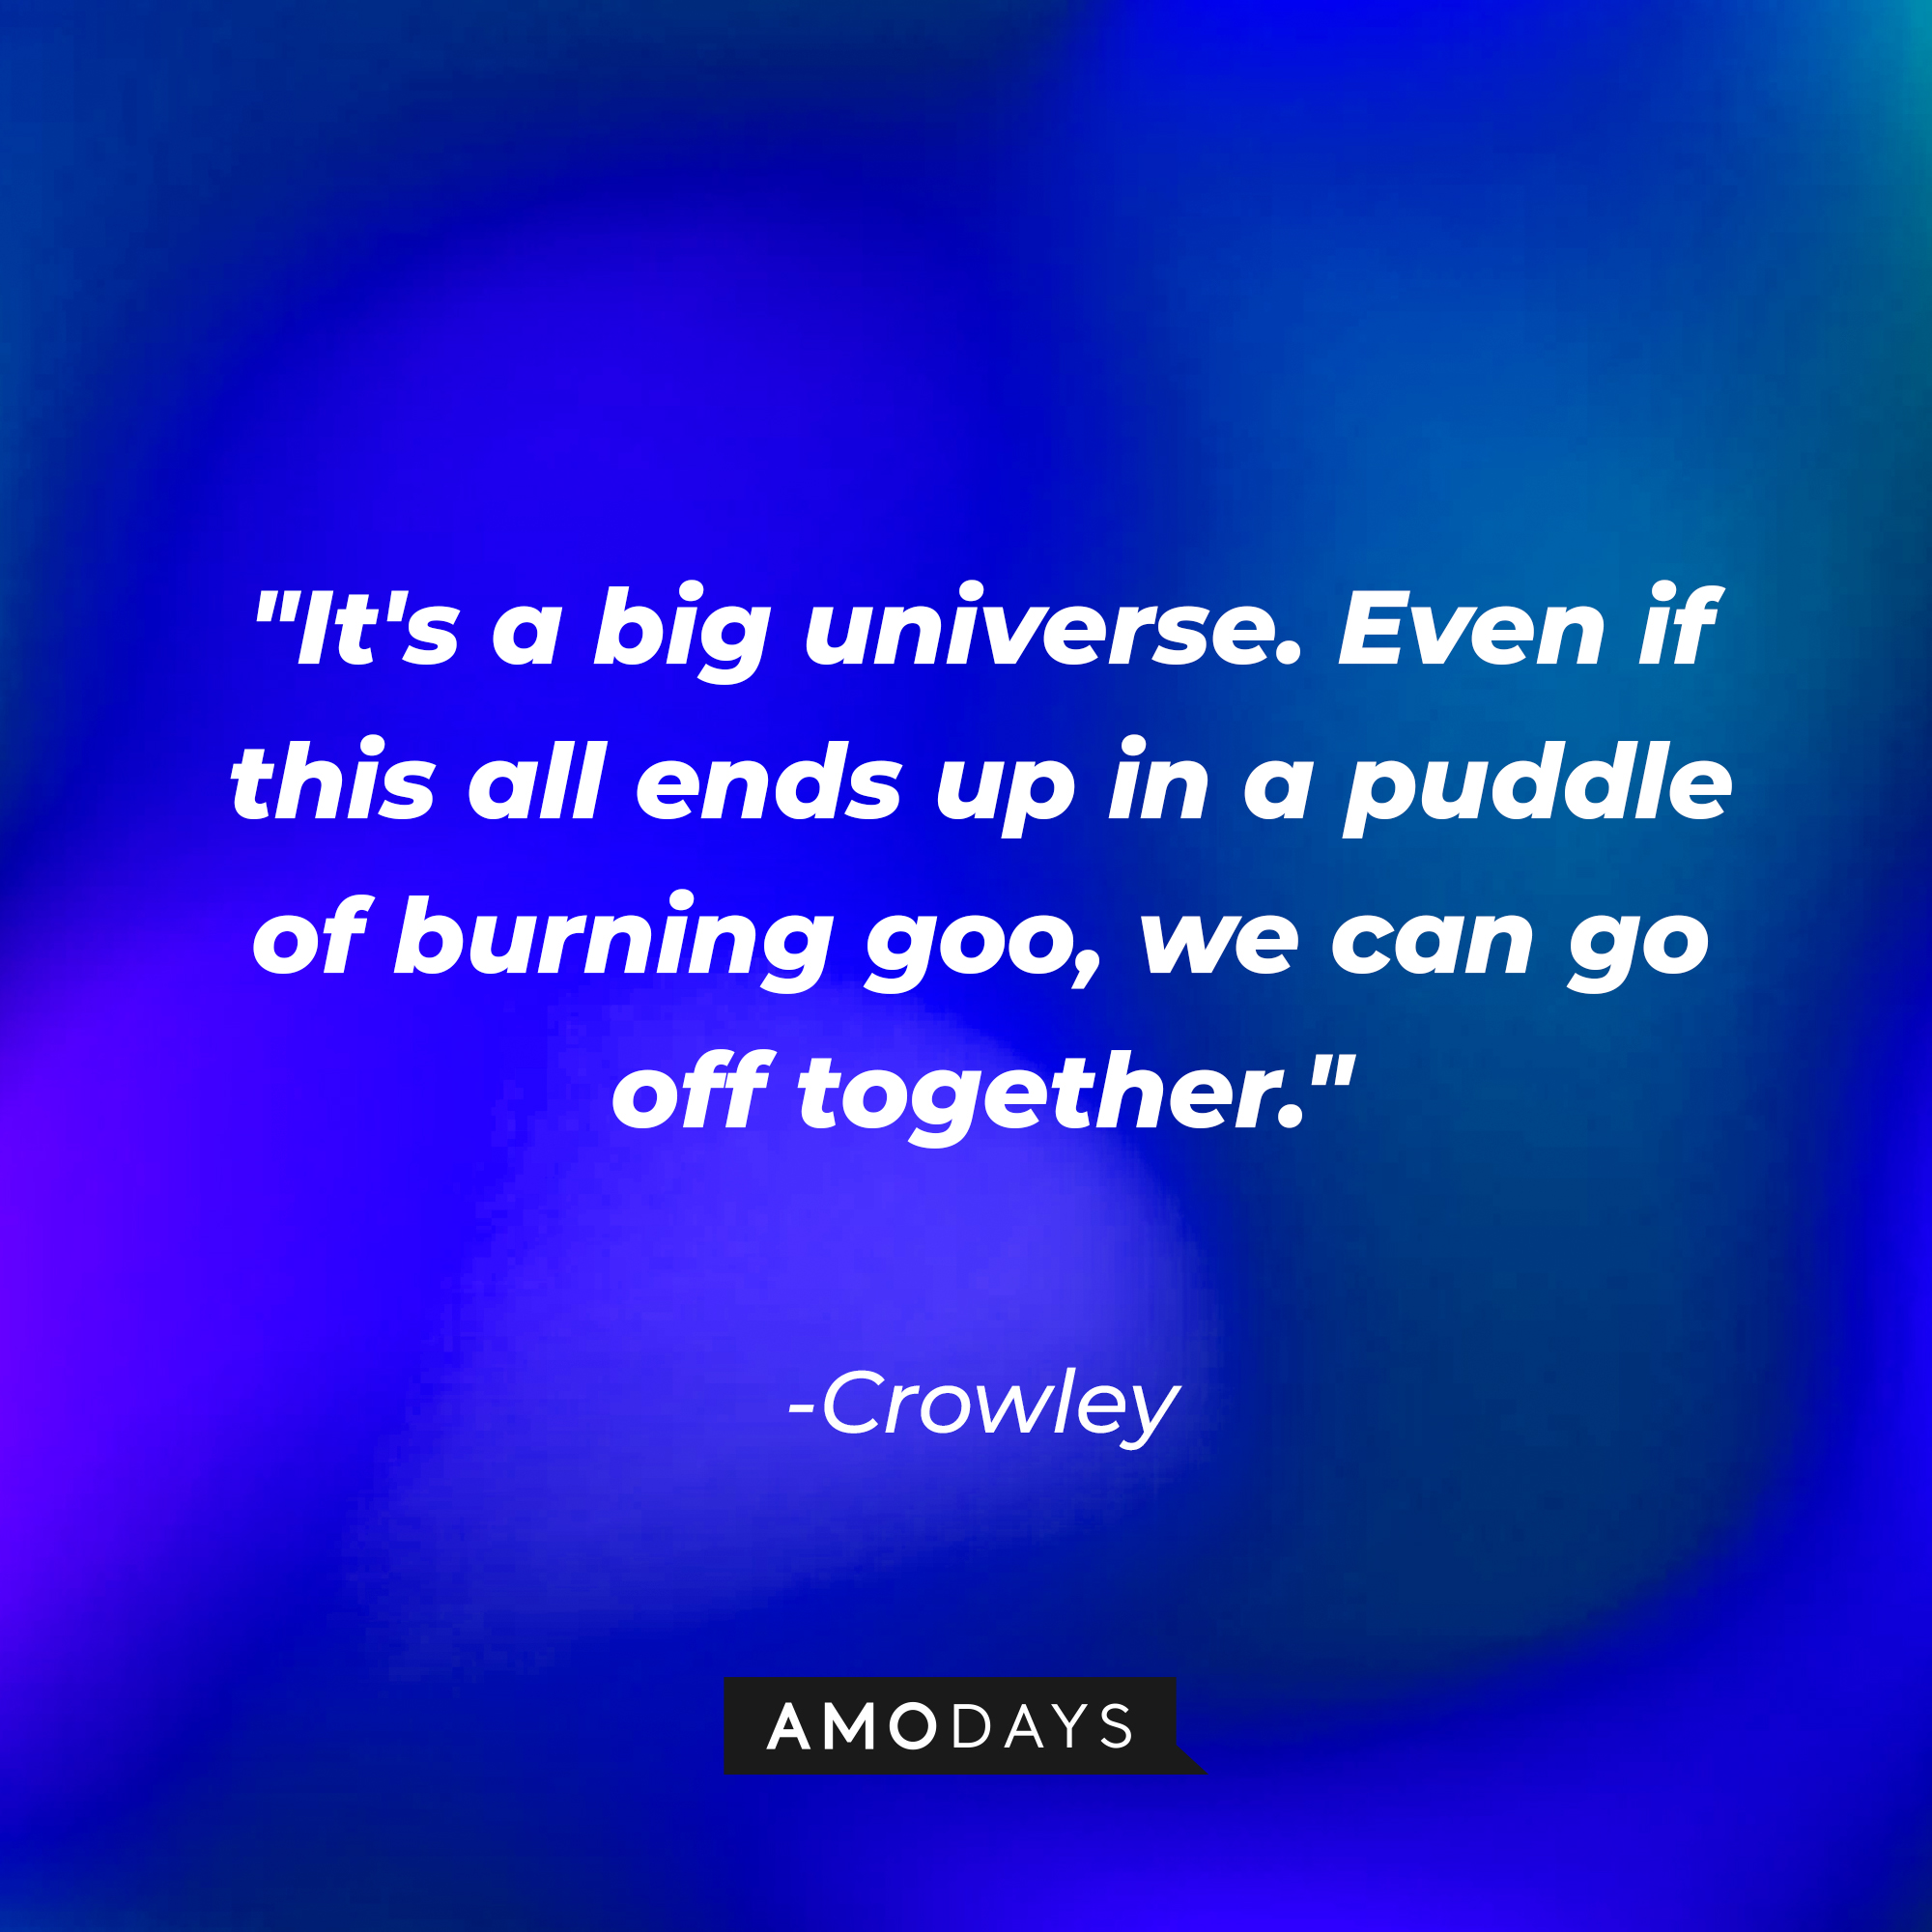 Crowley's quote: "It's a big universe. Even if this all ends up in a puddle of burning goo, we can go off together." | Source: AmoDays